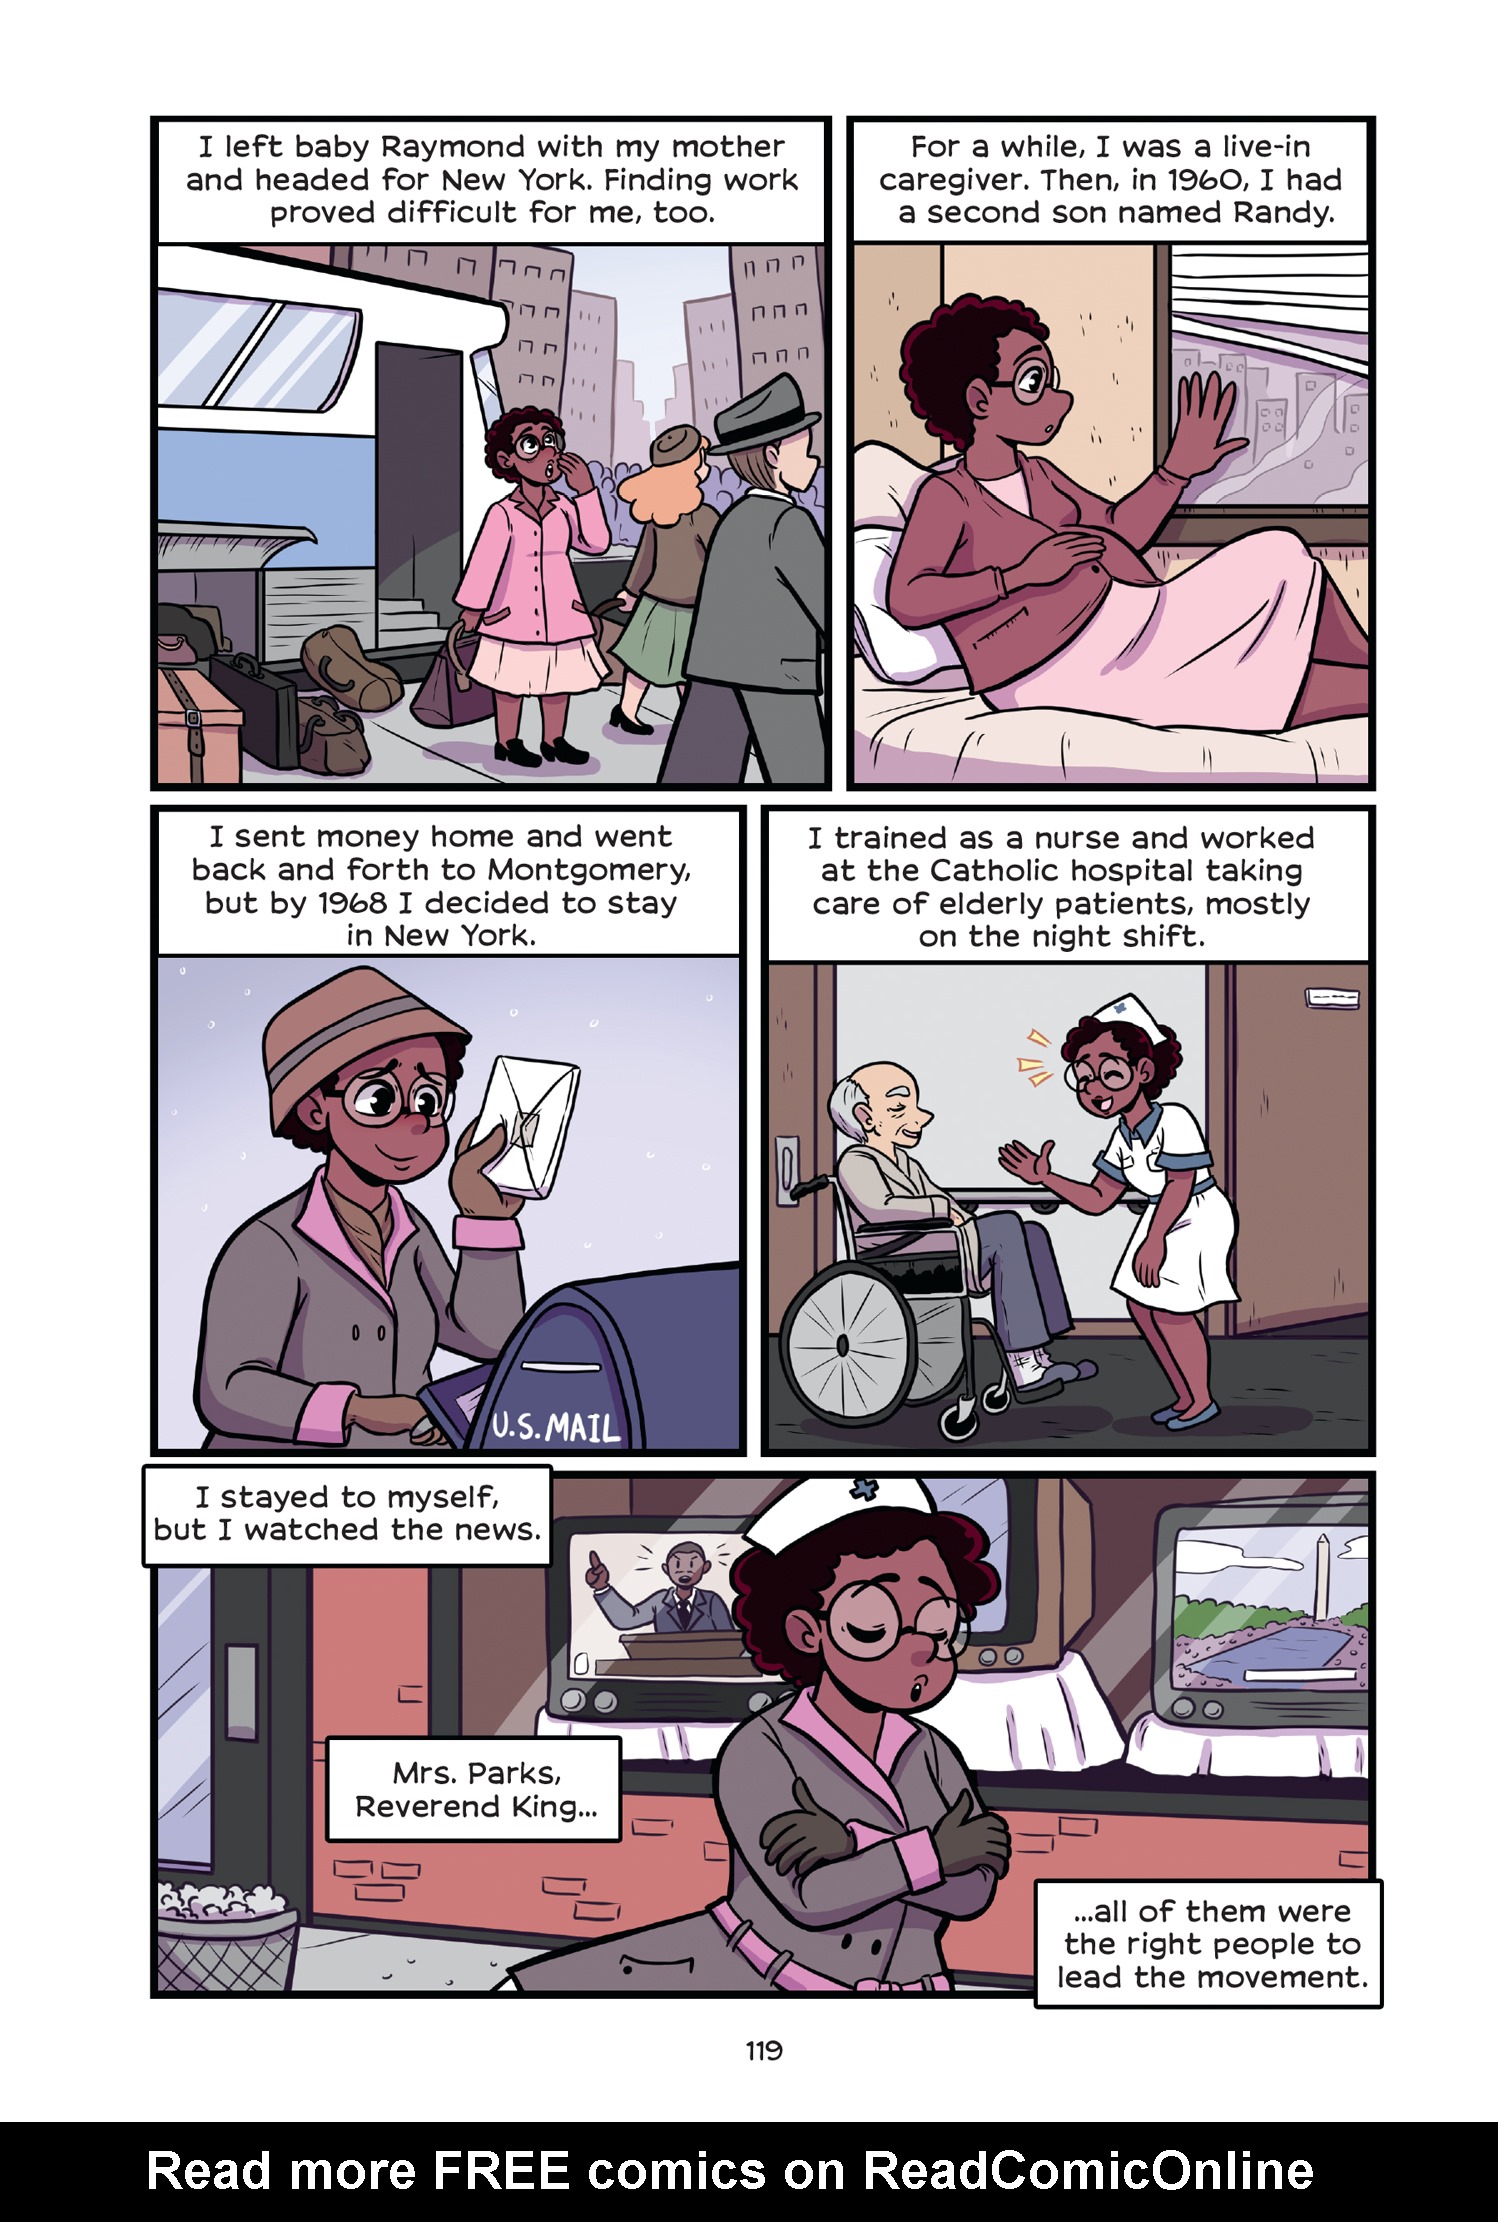 Read online History Comics comic -  Issue # Rosa Parks & Claudette Colvin - Civil Rights Heroes - 124